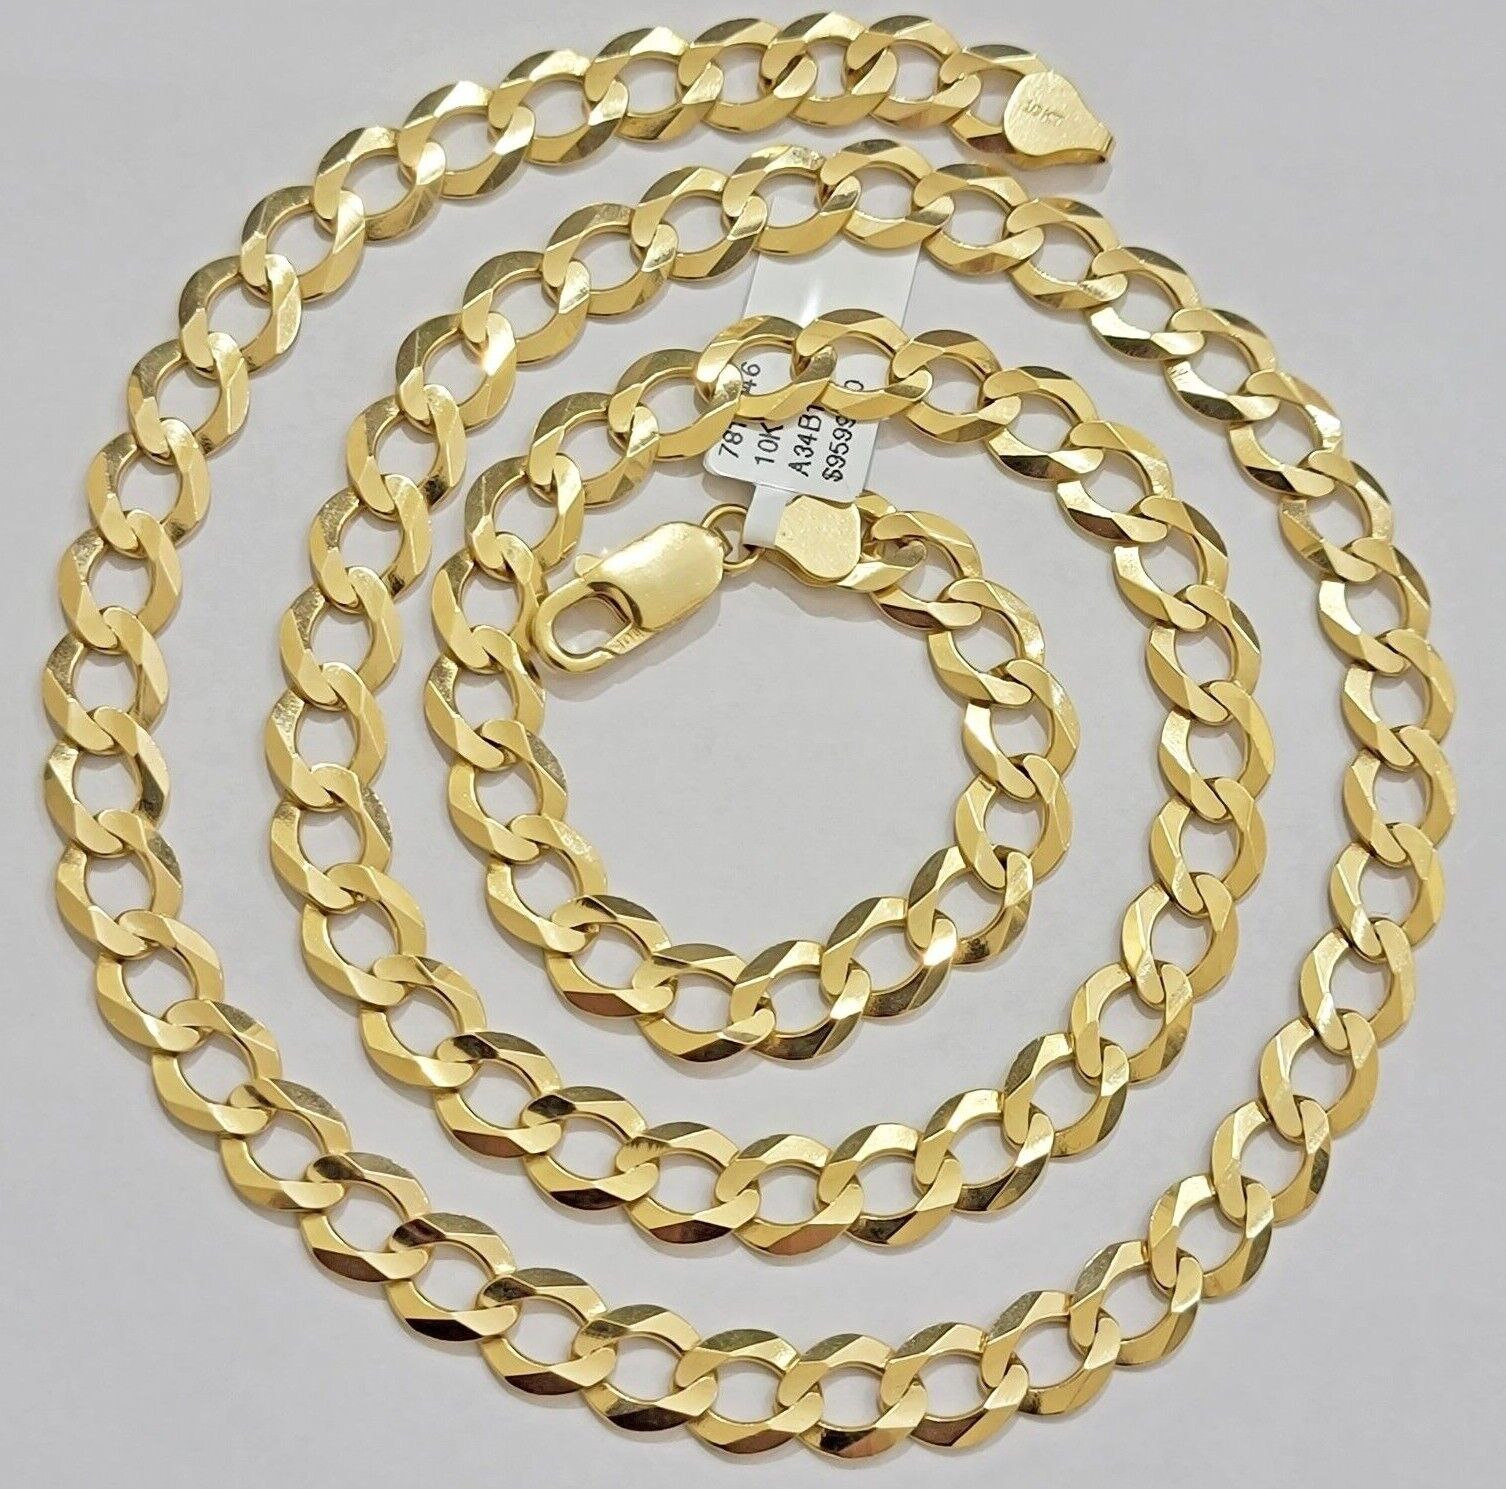 Solid 10k Gold Chain 9mm Mens Necklace Cuban Curb Link 26 inch REAL 10KT STRONG